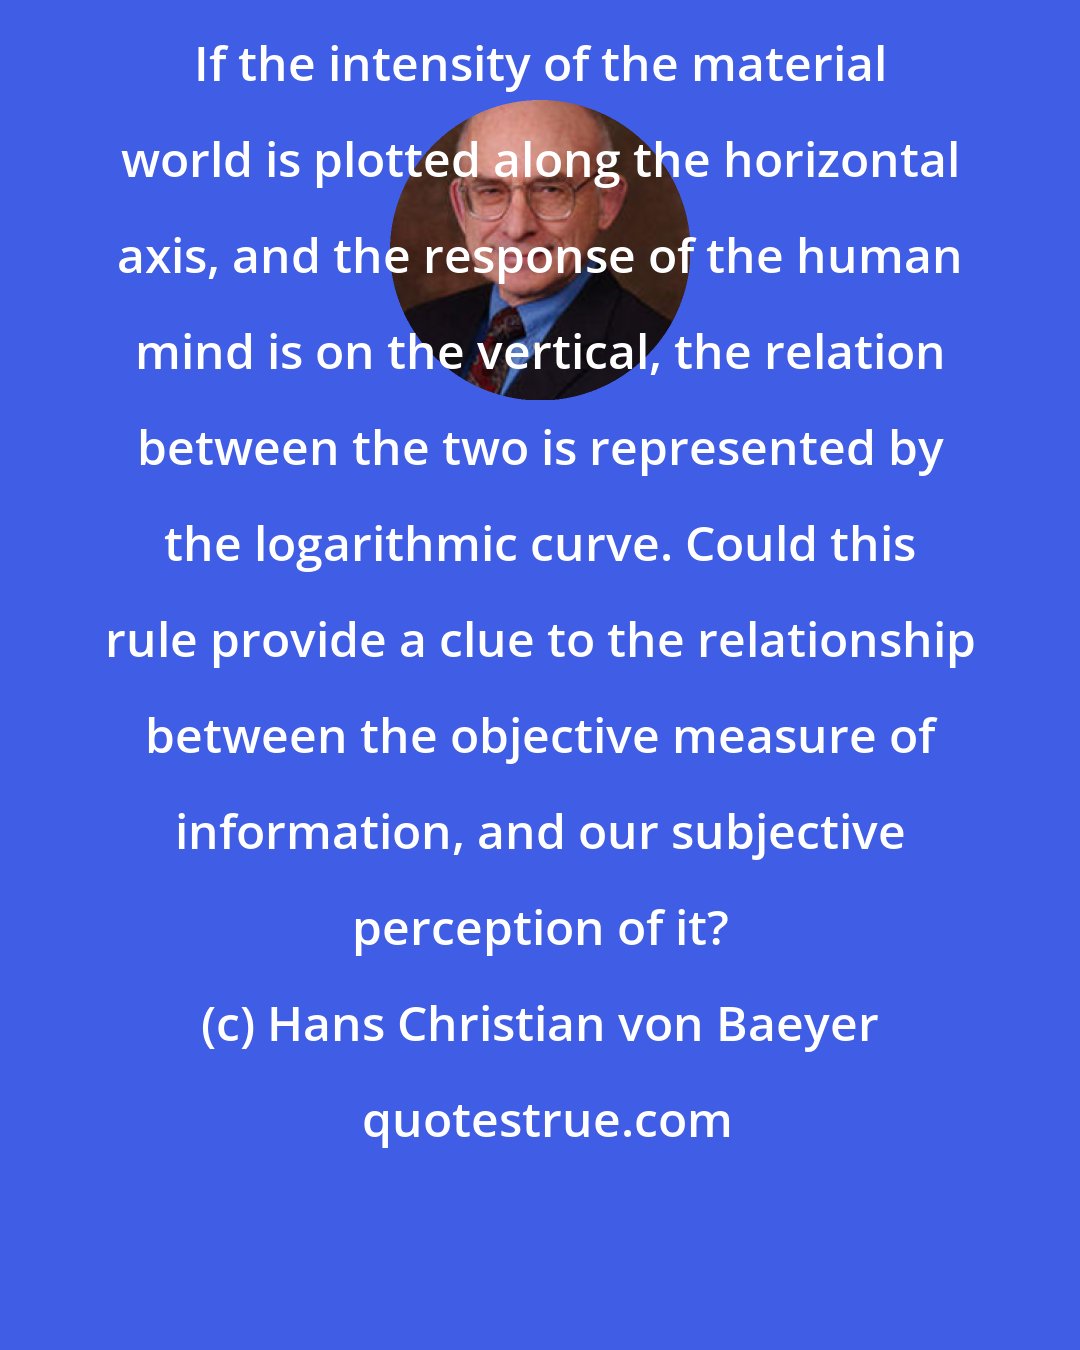 Hans Christian von Baeyer: If the intensity of the material world is plotted along the horizontal axis, and the response of the human mind is on the vertical, the relation between the two is represented by the logarithmic curve. Could this rule provide a clue to the relationship between the objective measure of information, and our subjective perception of it?